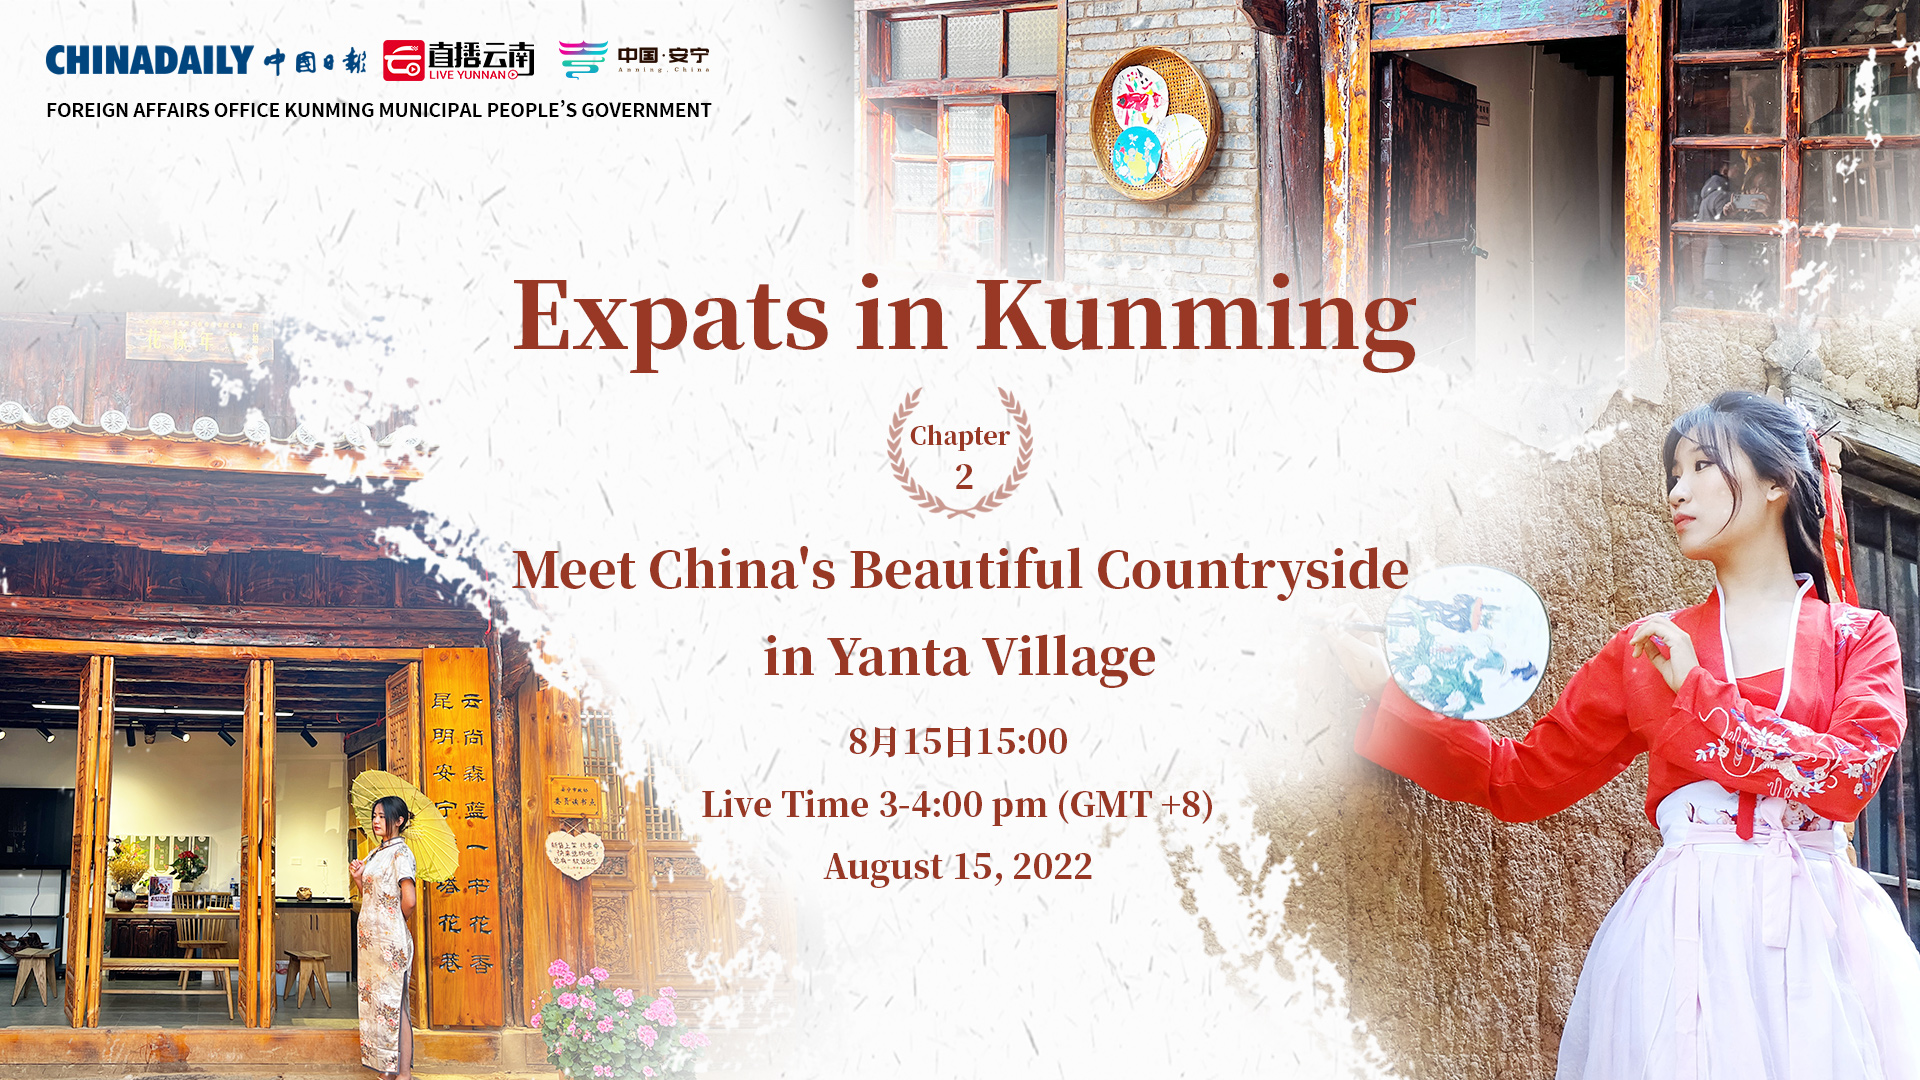 Watch it again: A tour of China's beautiful countryside in Yanta Village